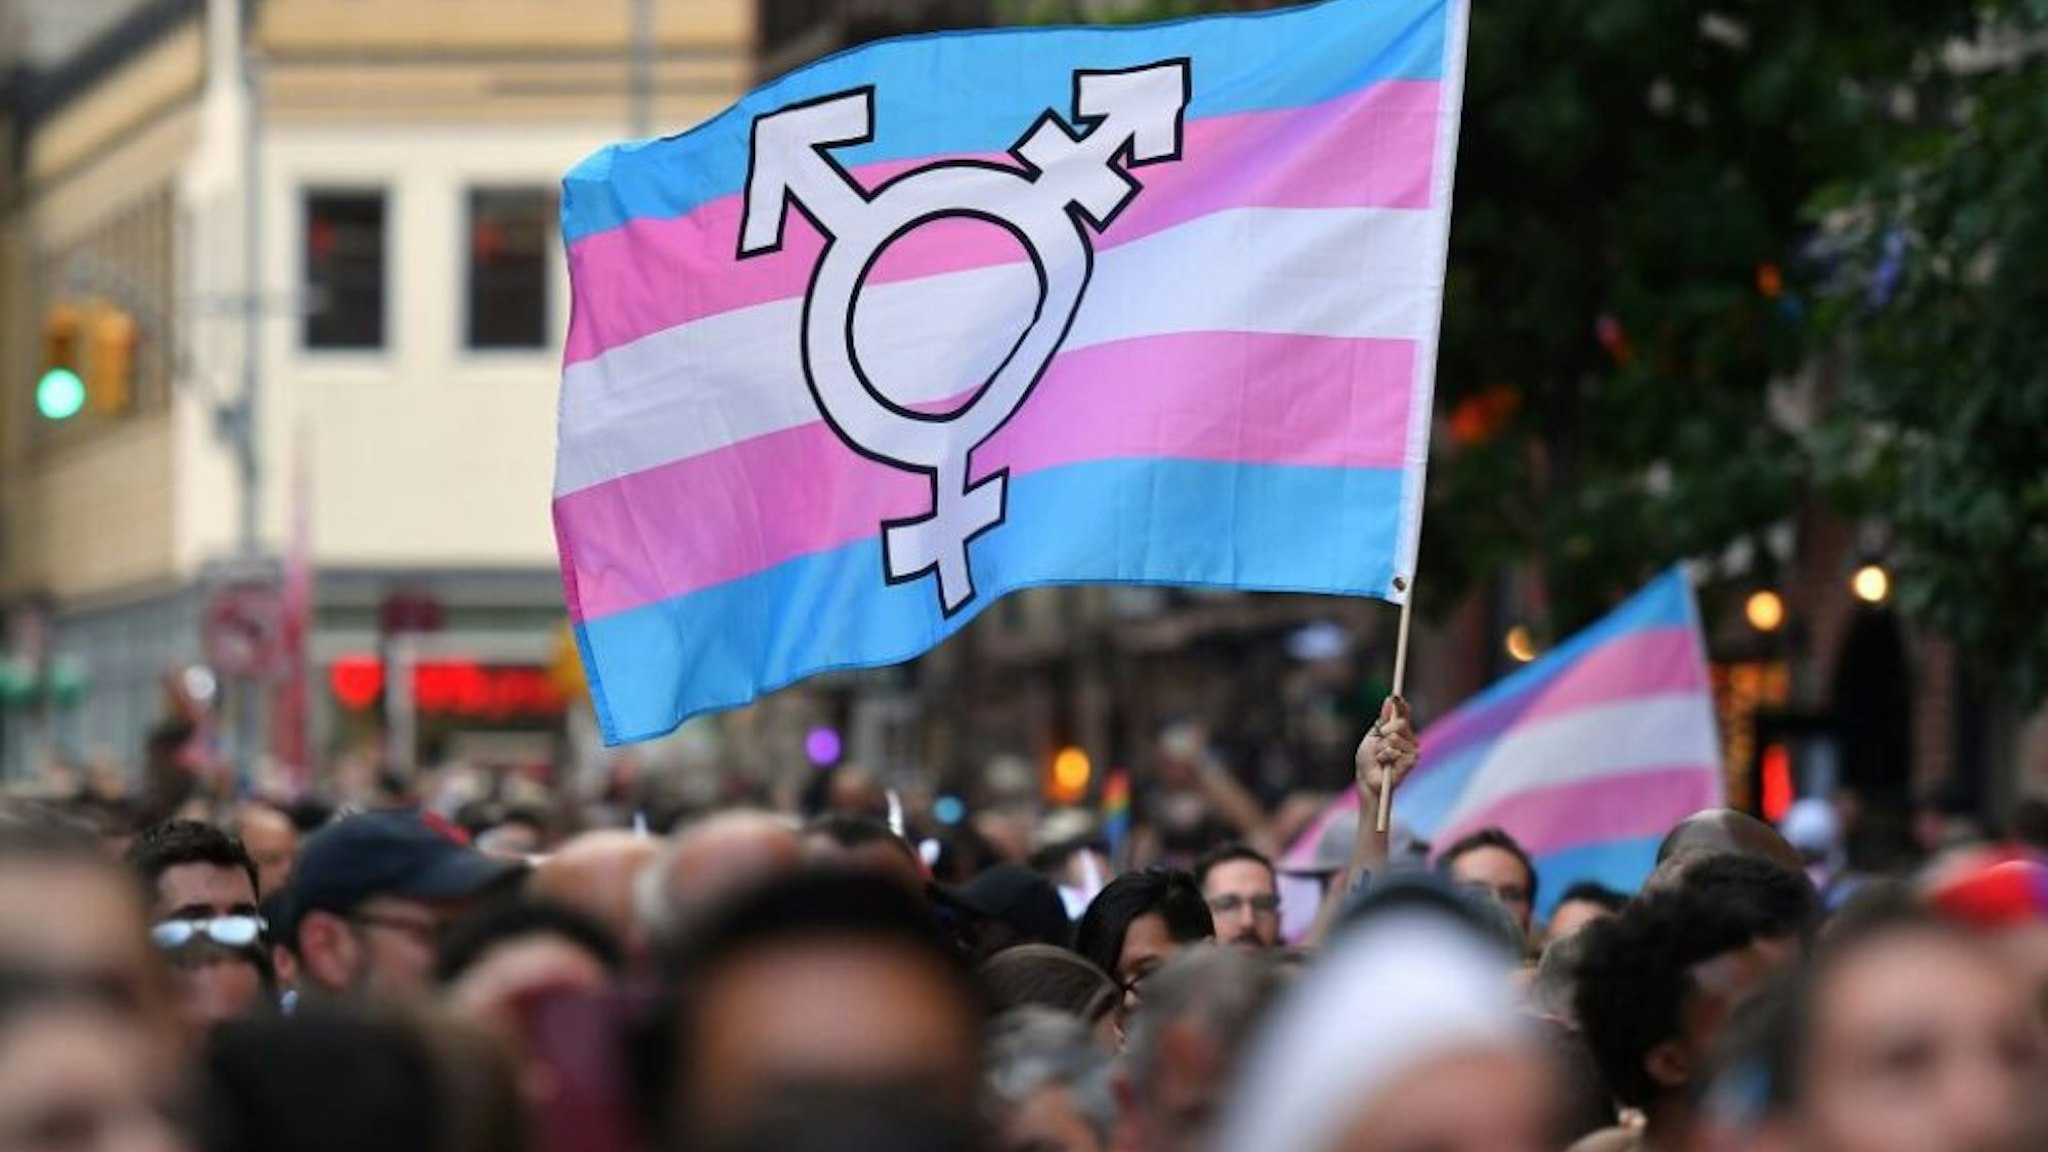 A person holds a transgender pride flag as people gather on Christopher Street outside the Stonewall Inn for a rally to mark the 50th anniversary of the Stonewall Riots in New York, June 28, 2019. - The June 1969 riots, sparked by repeated police raids on the Stonewall Inn -- a well-known gay bar in New York's Greenwich Village -- proved to be a turning point in the LGBTQ community's struggle for civil rights.